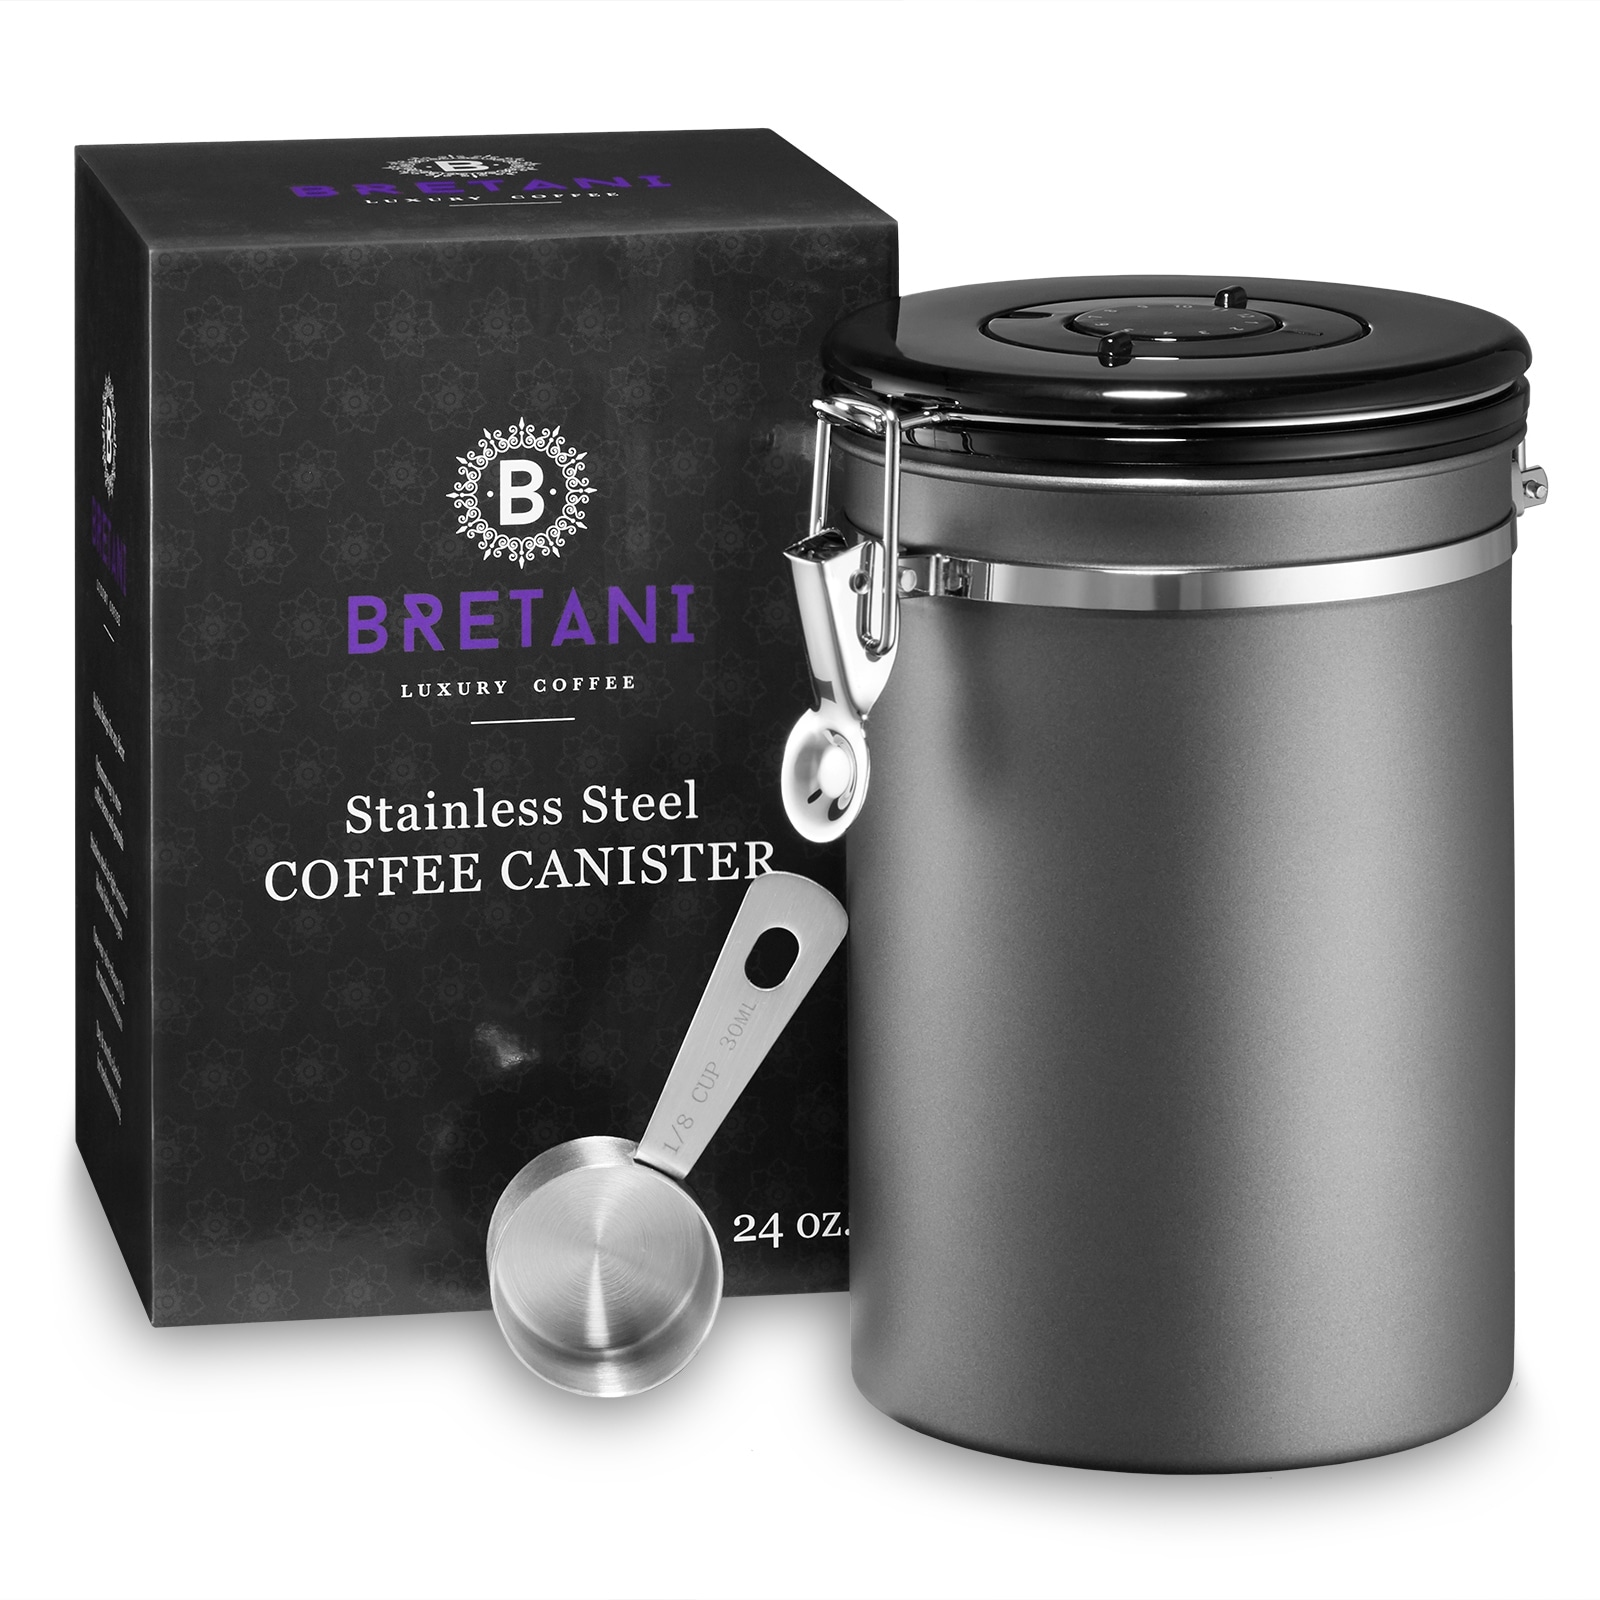 https://ak1.ostkcdn.com/images/products/is/images/direct/52d97c23efef708a348e5327c63c6e9d3acd635f/Steel-Coffee-Canister-%26-Scoop-Set-%2824oz.%29-by-Bretani.jpg